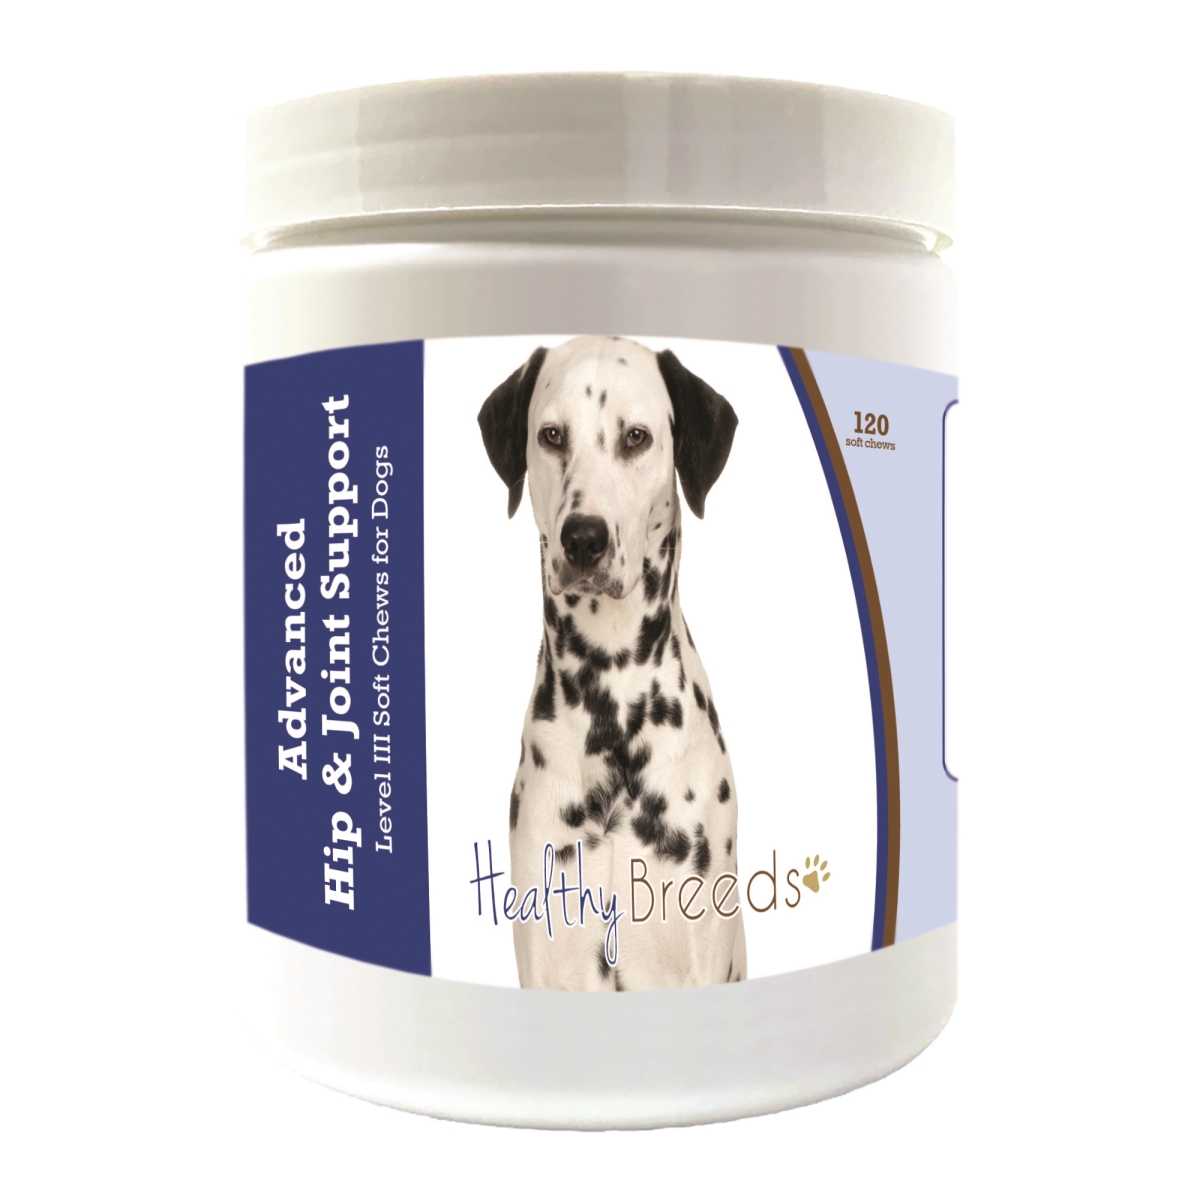 Picture of Healthy Breeds 192959898071 Dalmatian Advanced Hip & Joint Support Level III Soft Chews for Dogs